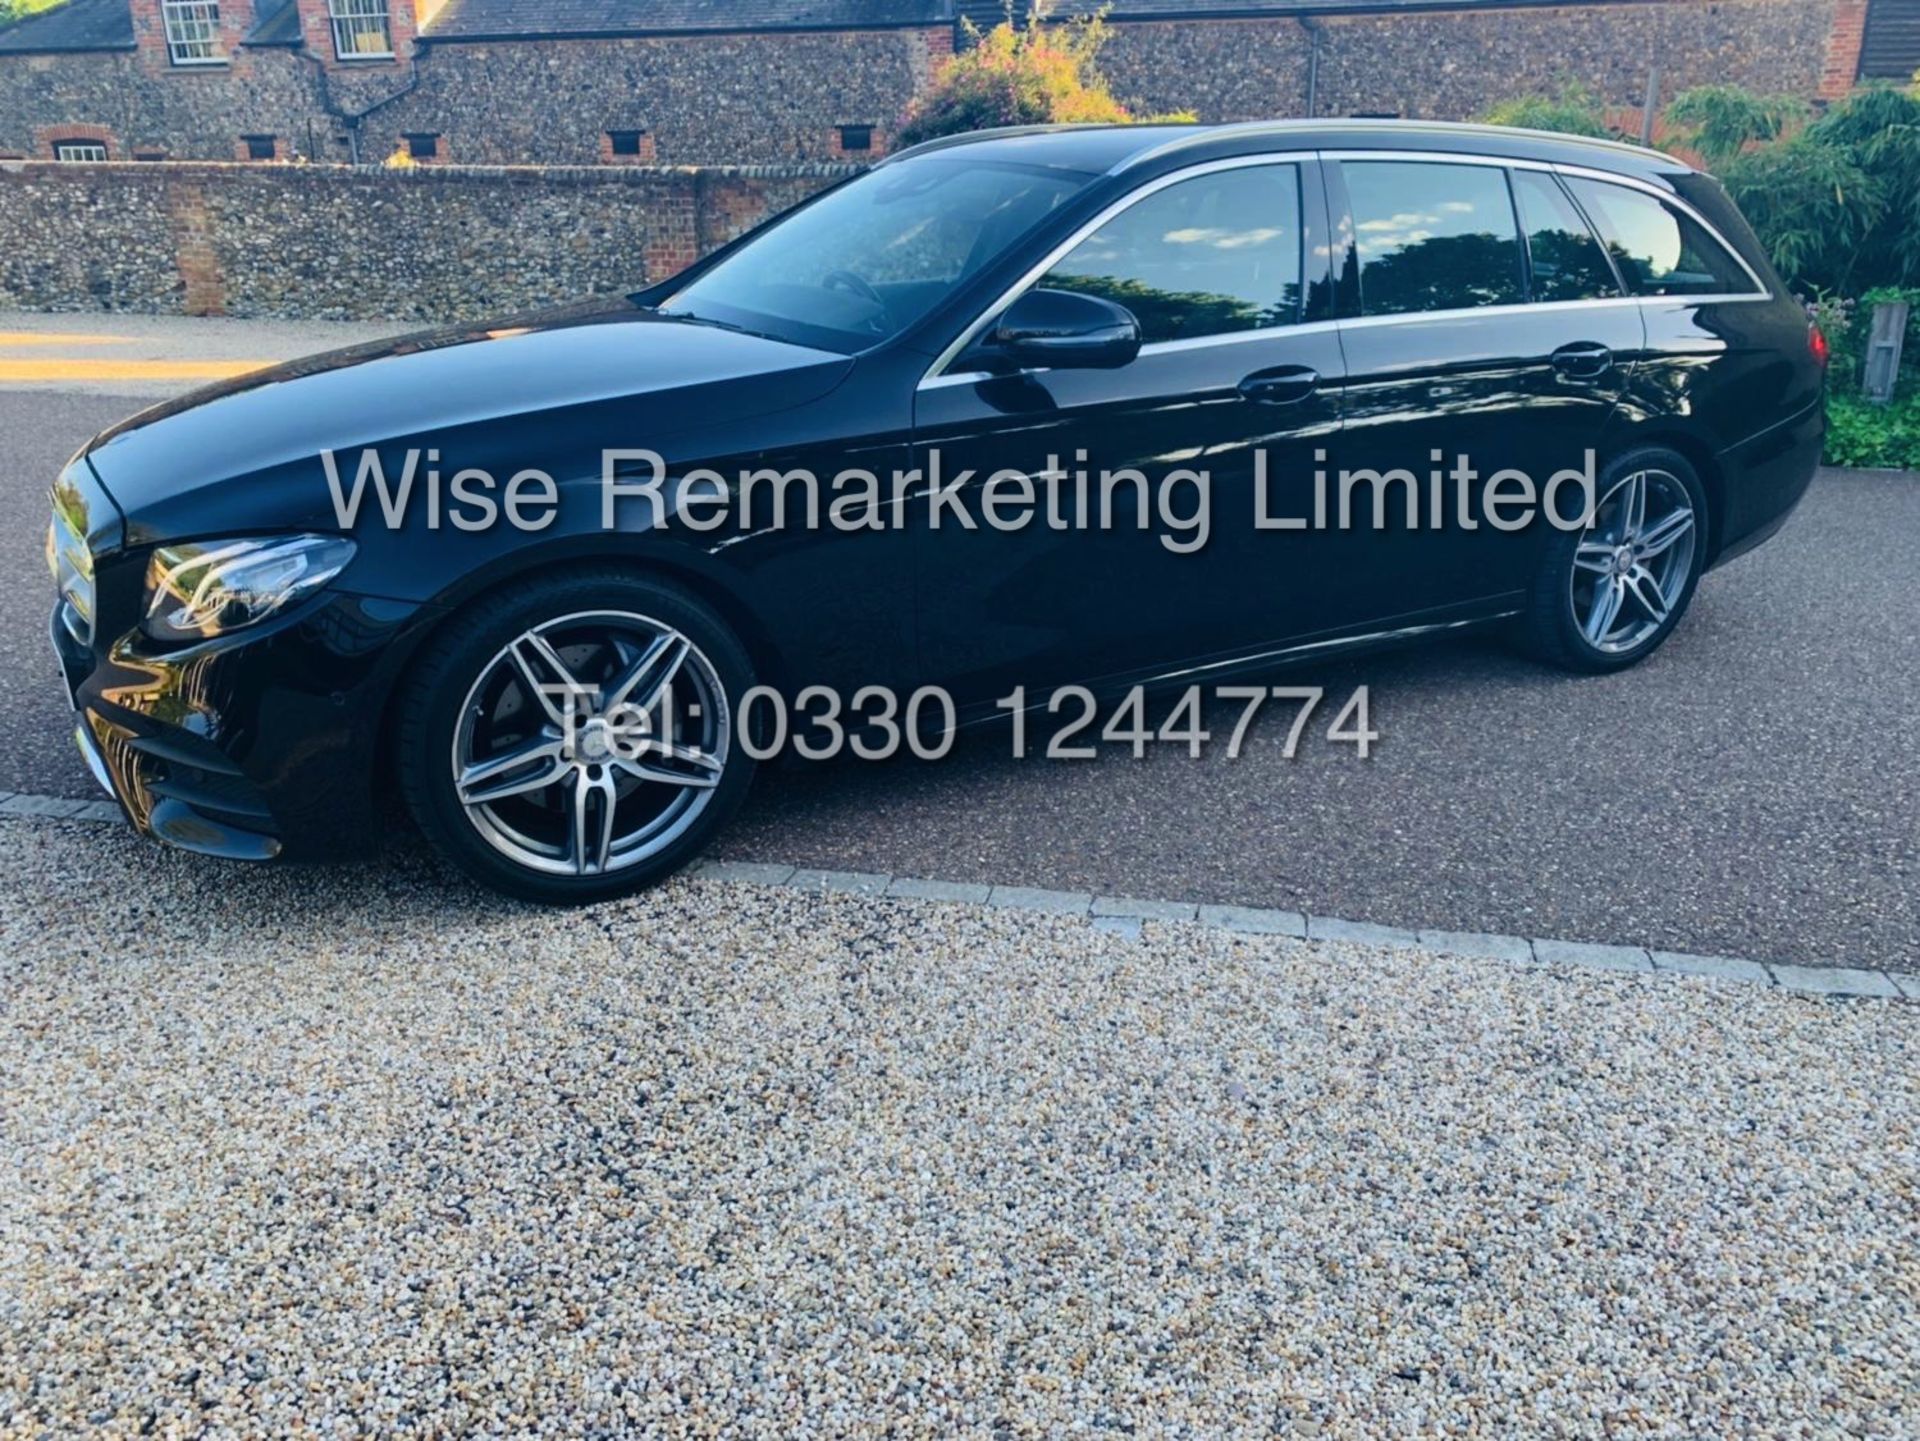 MERCEDES E CLASS ESTATE E220D AMG LINE 2017 / 9G -TRONIC / *LOW MILES* / 1 OWNER - Image 6 of 42